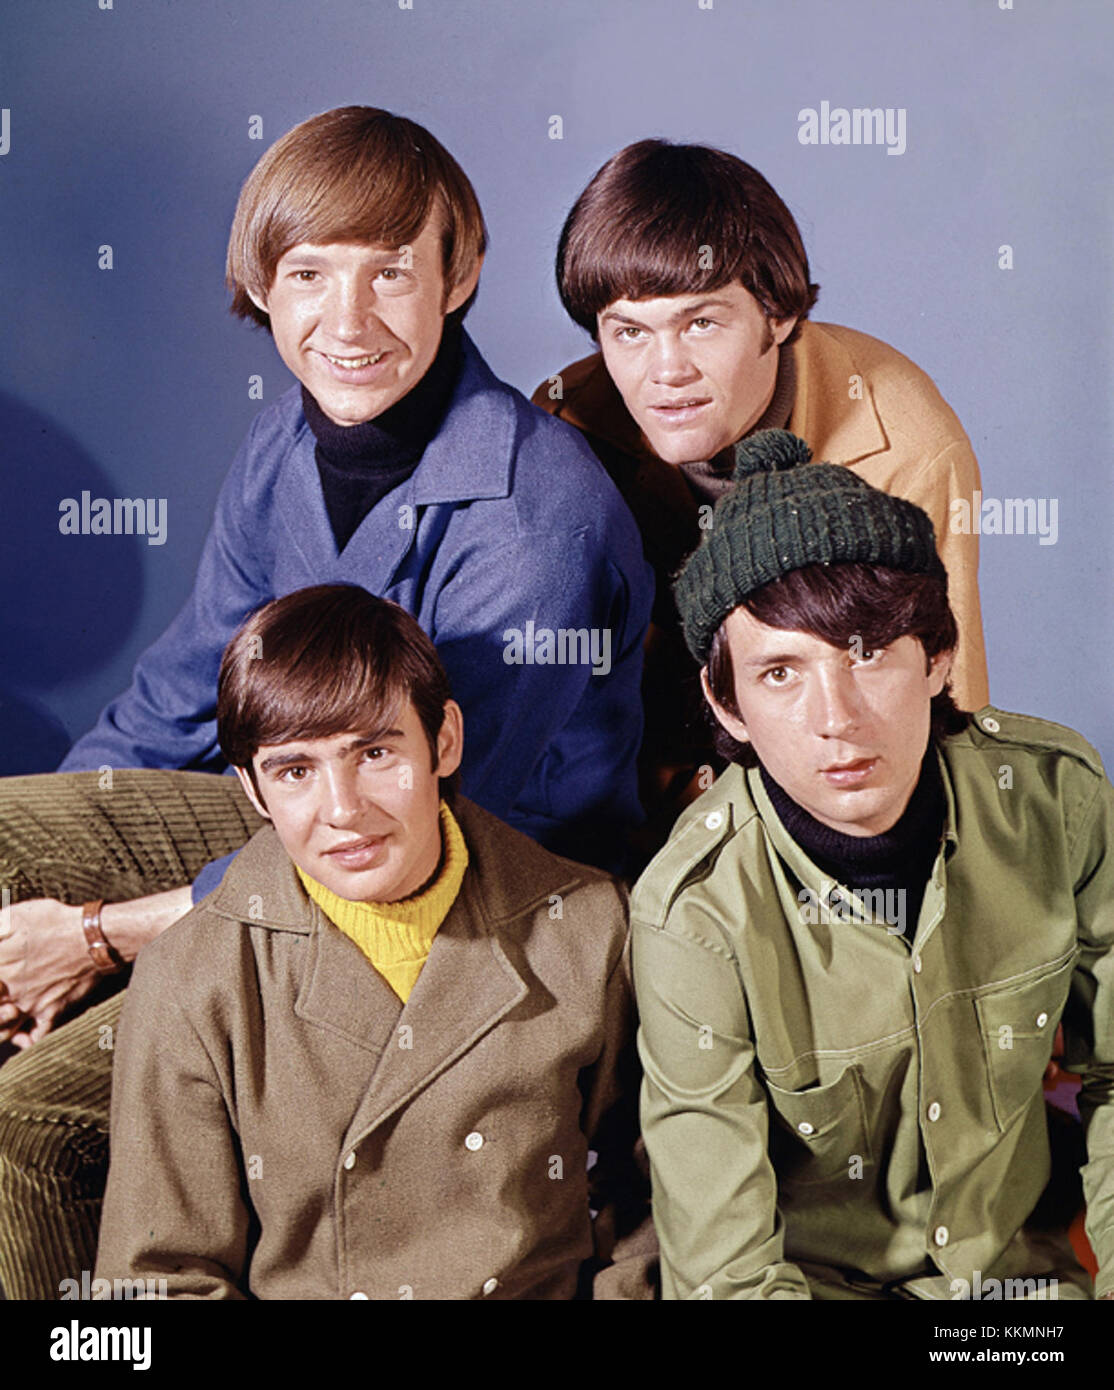 Pop musical group, 'The Monkees' are shown in this Oct. 20, 1966 photo. At top are: Peter Tork, right, and Mickey Dolenz. At bottom are: David Jones, left, and Mike Nesmith. (AP Photo) The Monkees 1966 Stock Photo